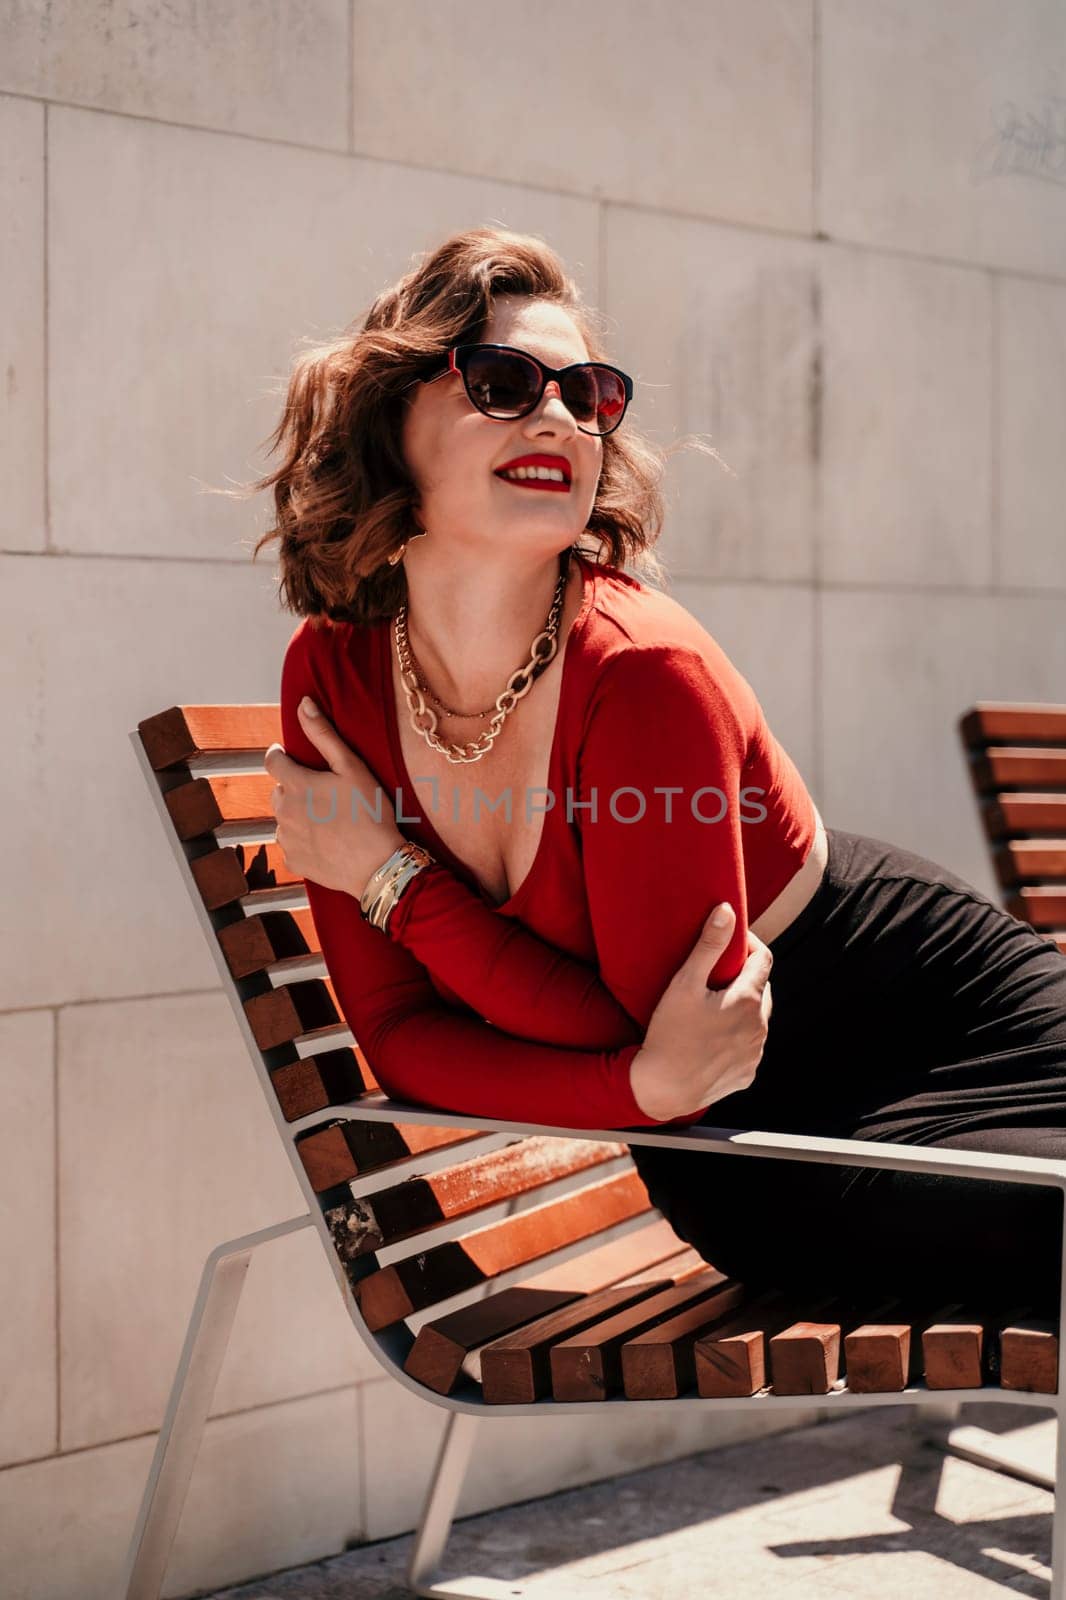 Portrait of a smiling woman on the street. An attractive woman with glasses, a red blouse and a black skirt is sitting on a bench on the street smiling